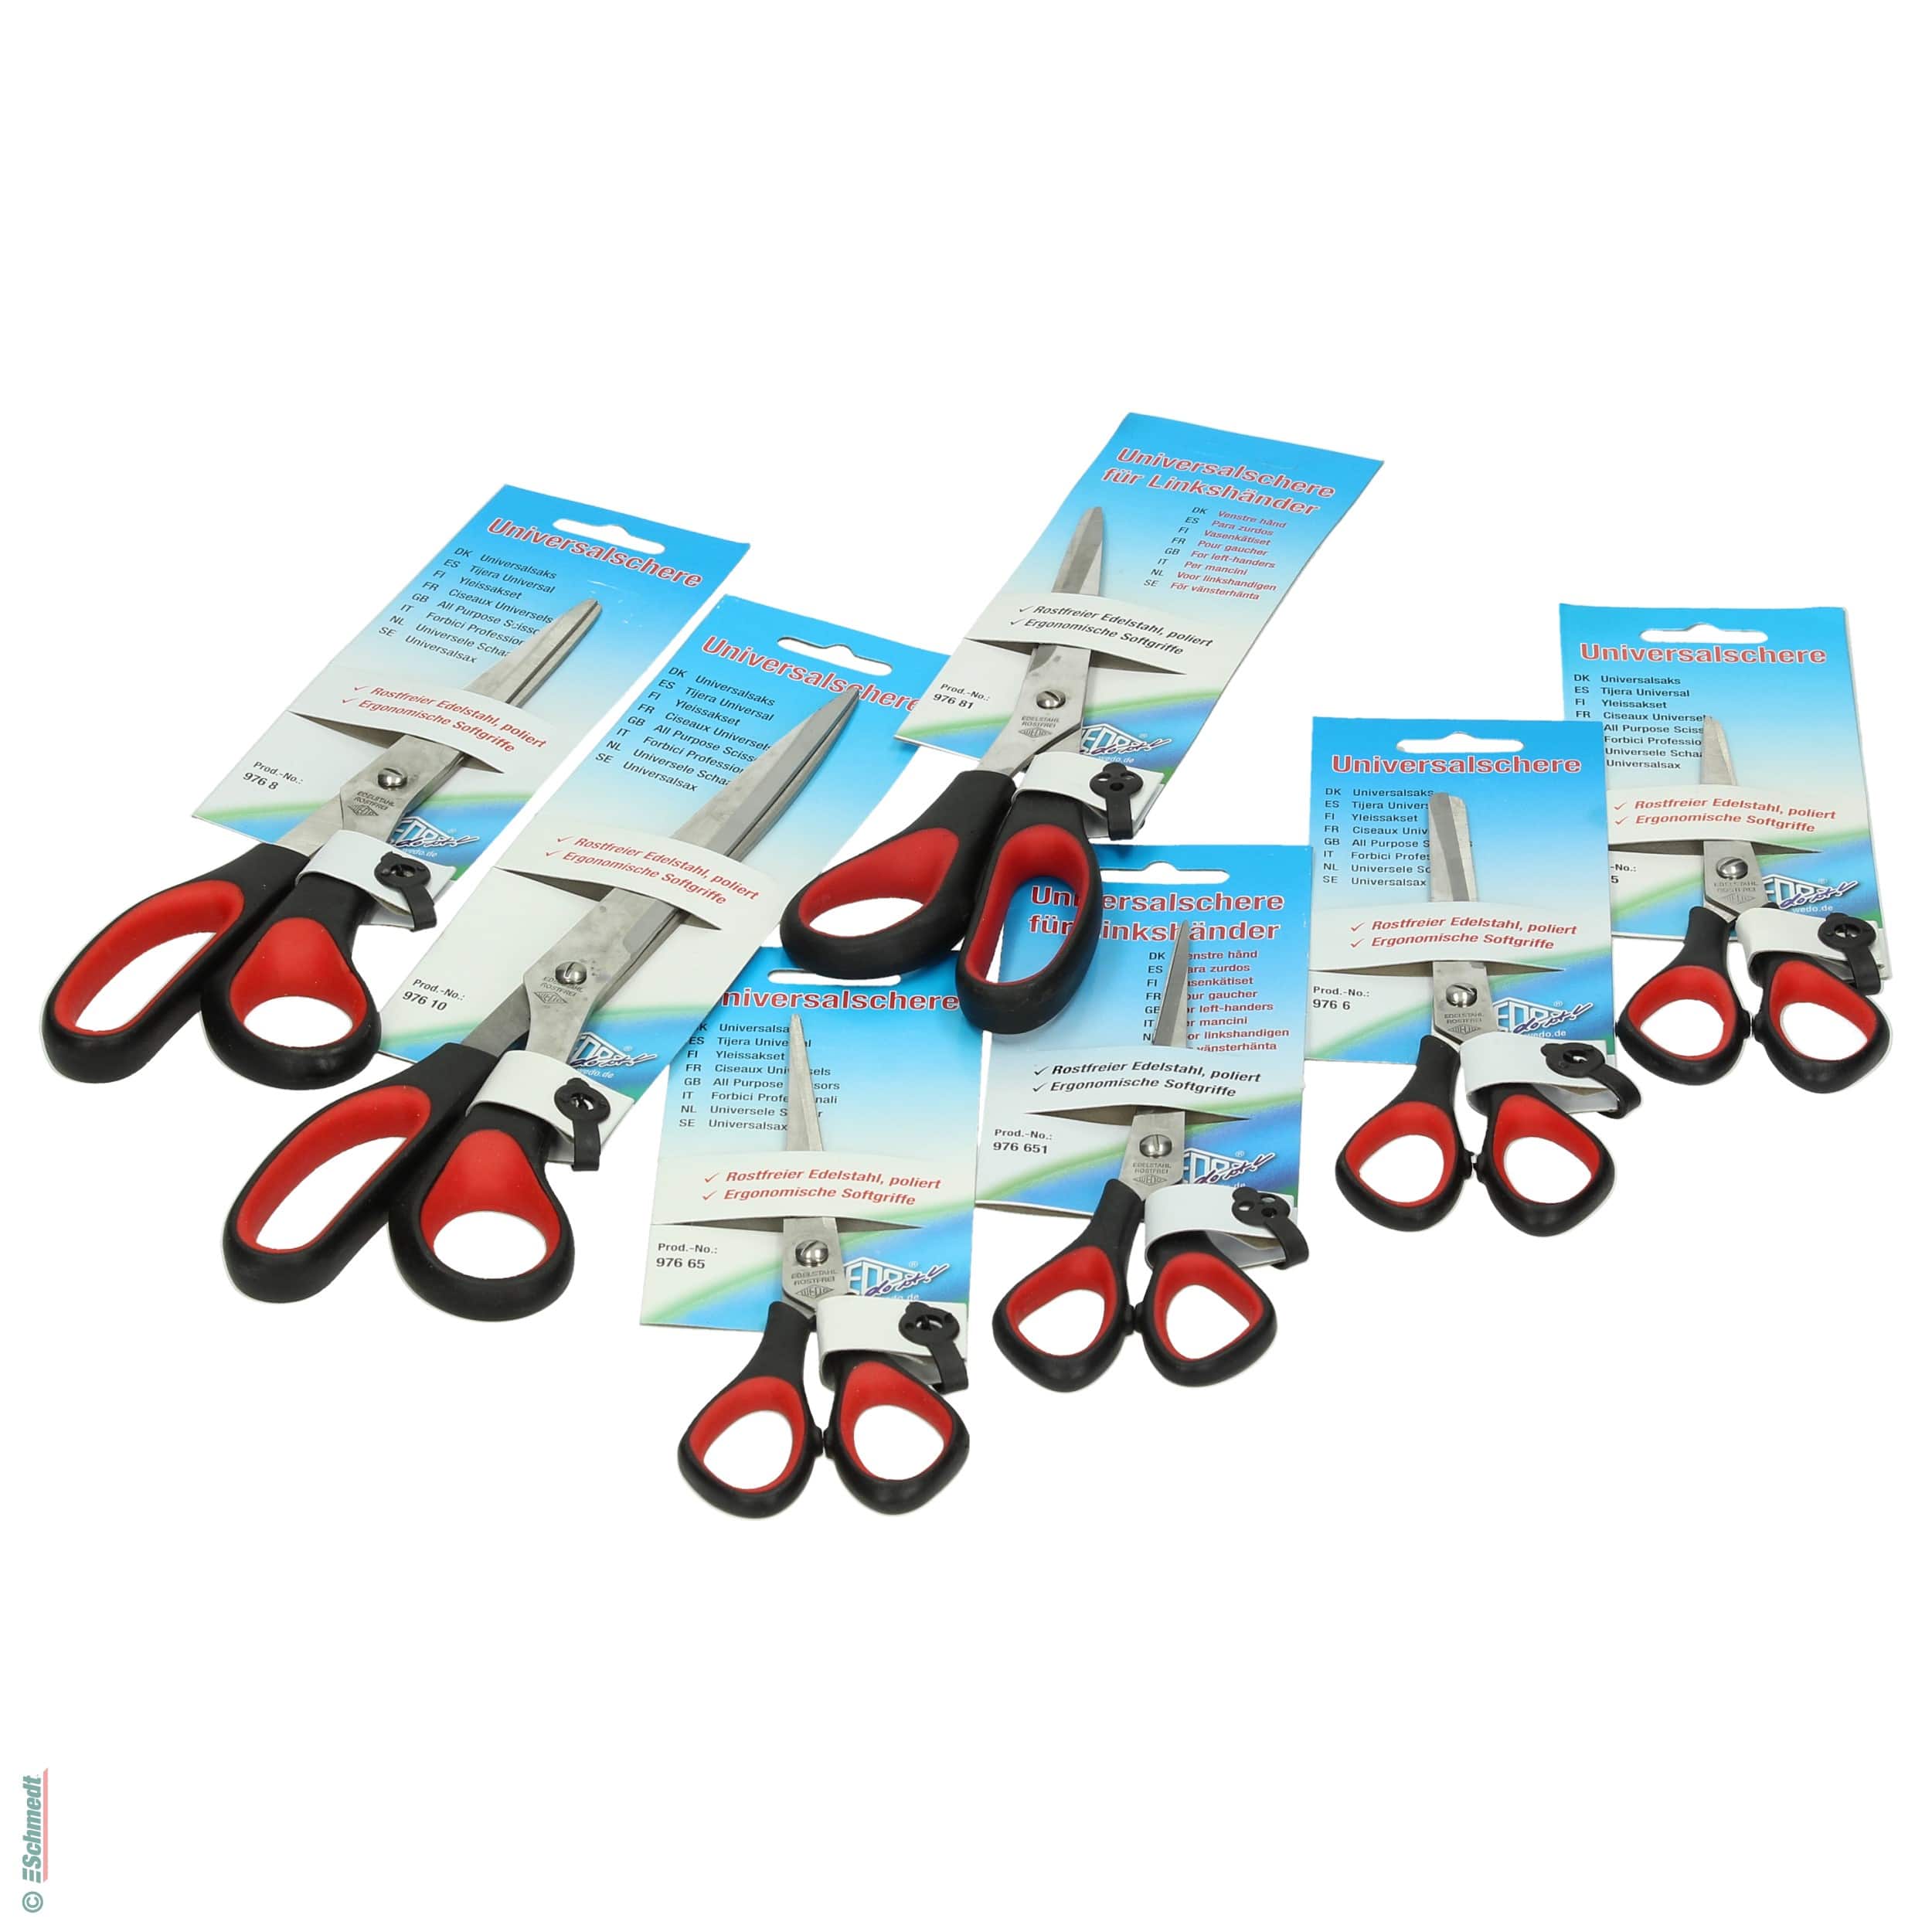 Multi-purpose scissors - with red rubber handles for comfortable grip... - image-2